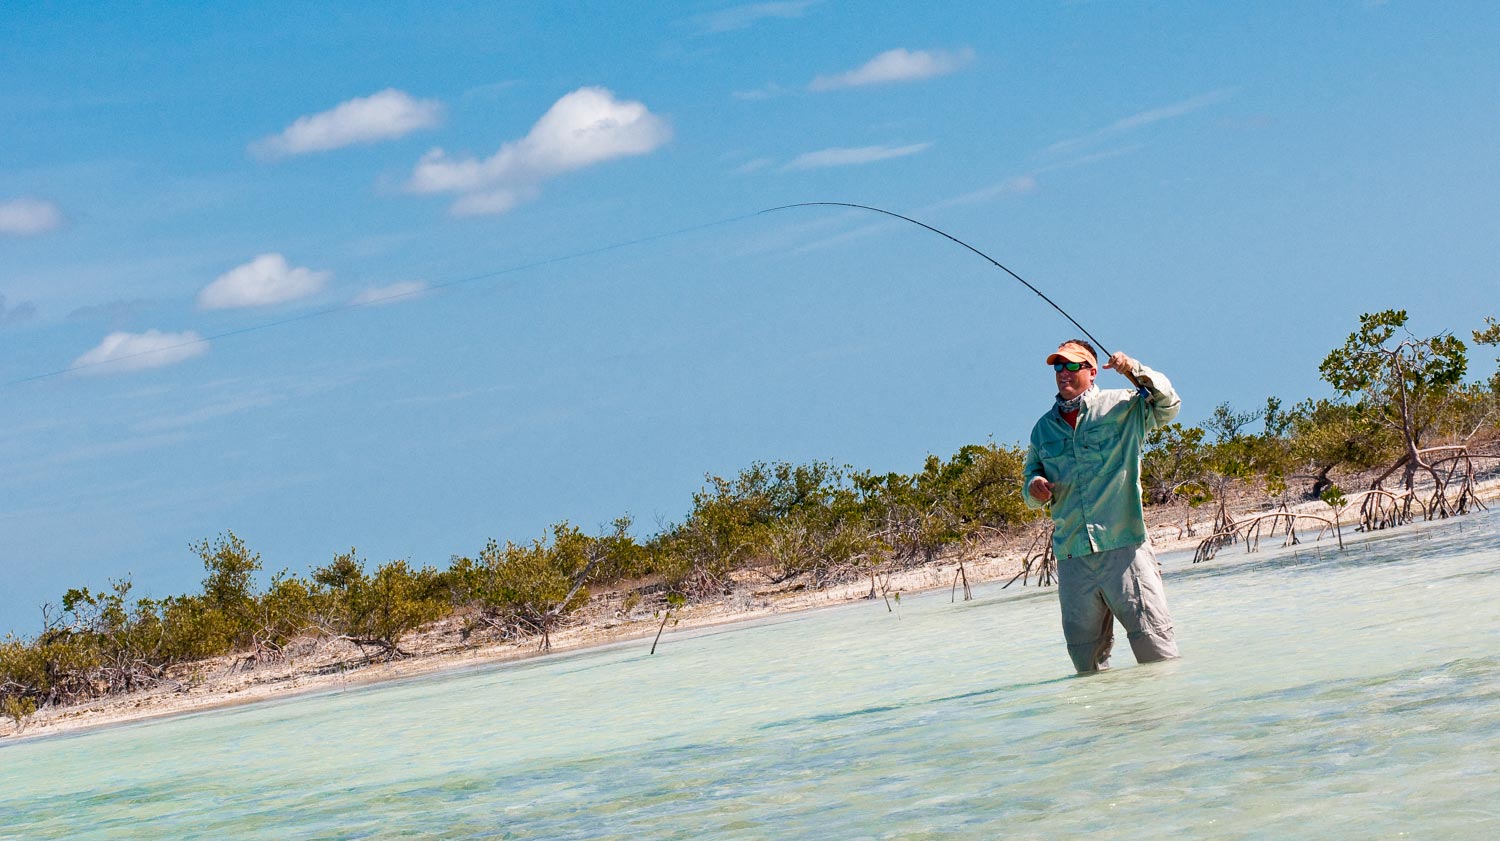 Saltwater fly fishing